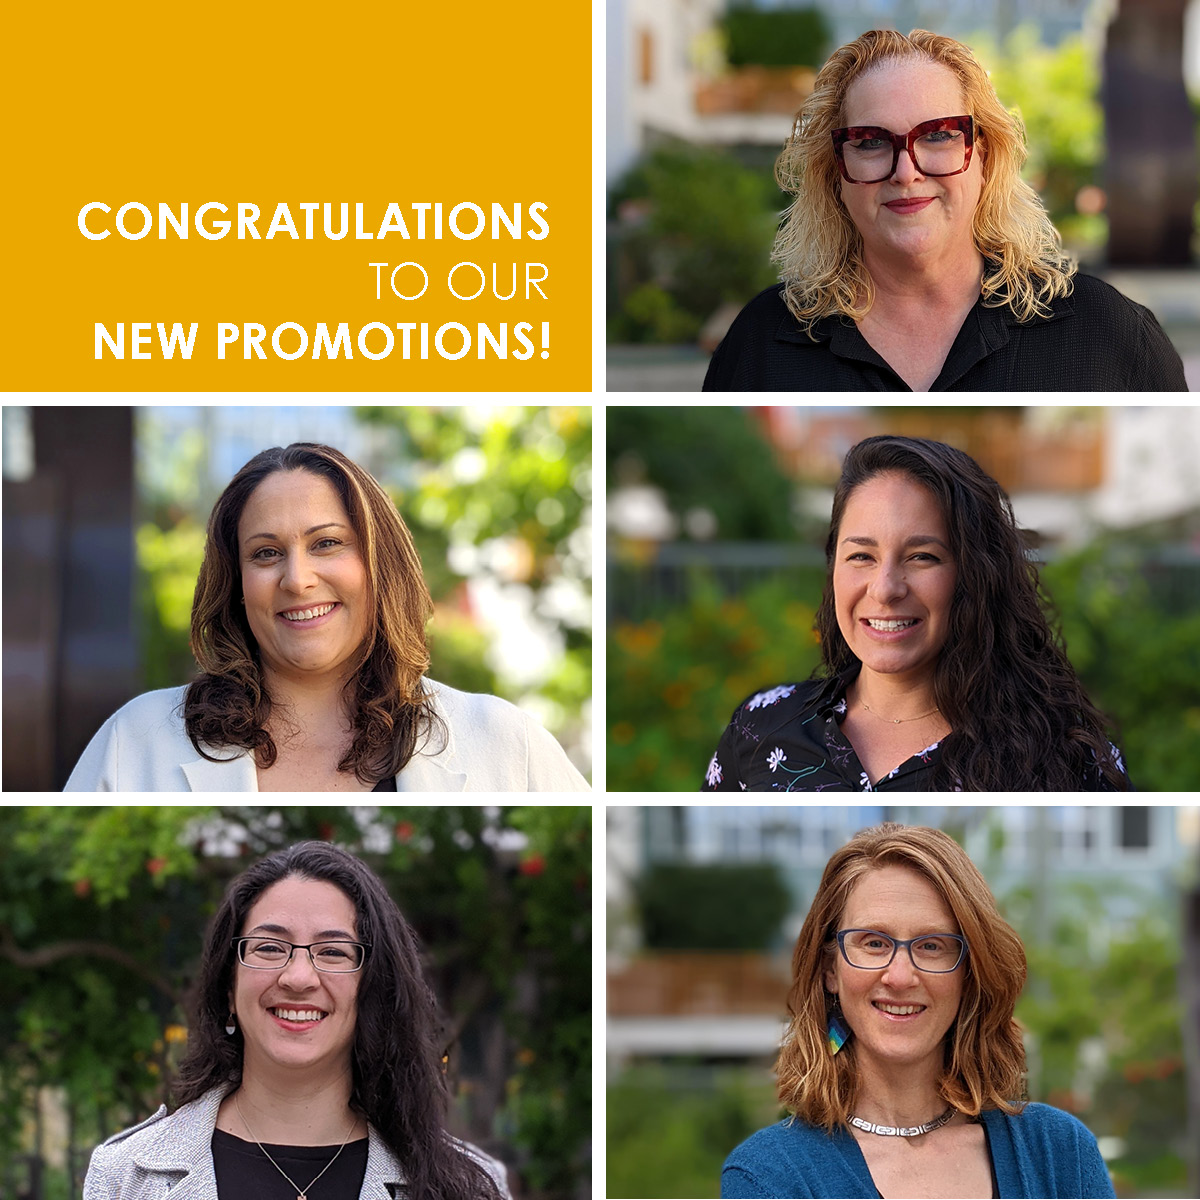 Congratulations to Our New Promotions!